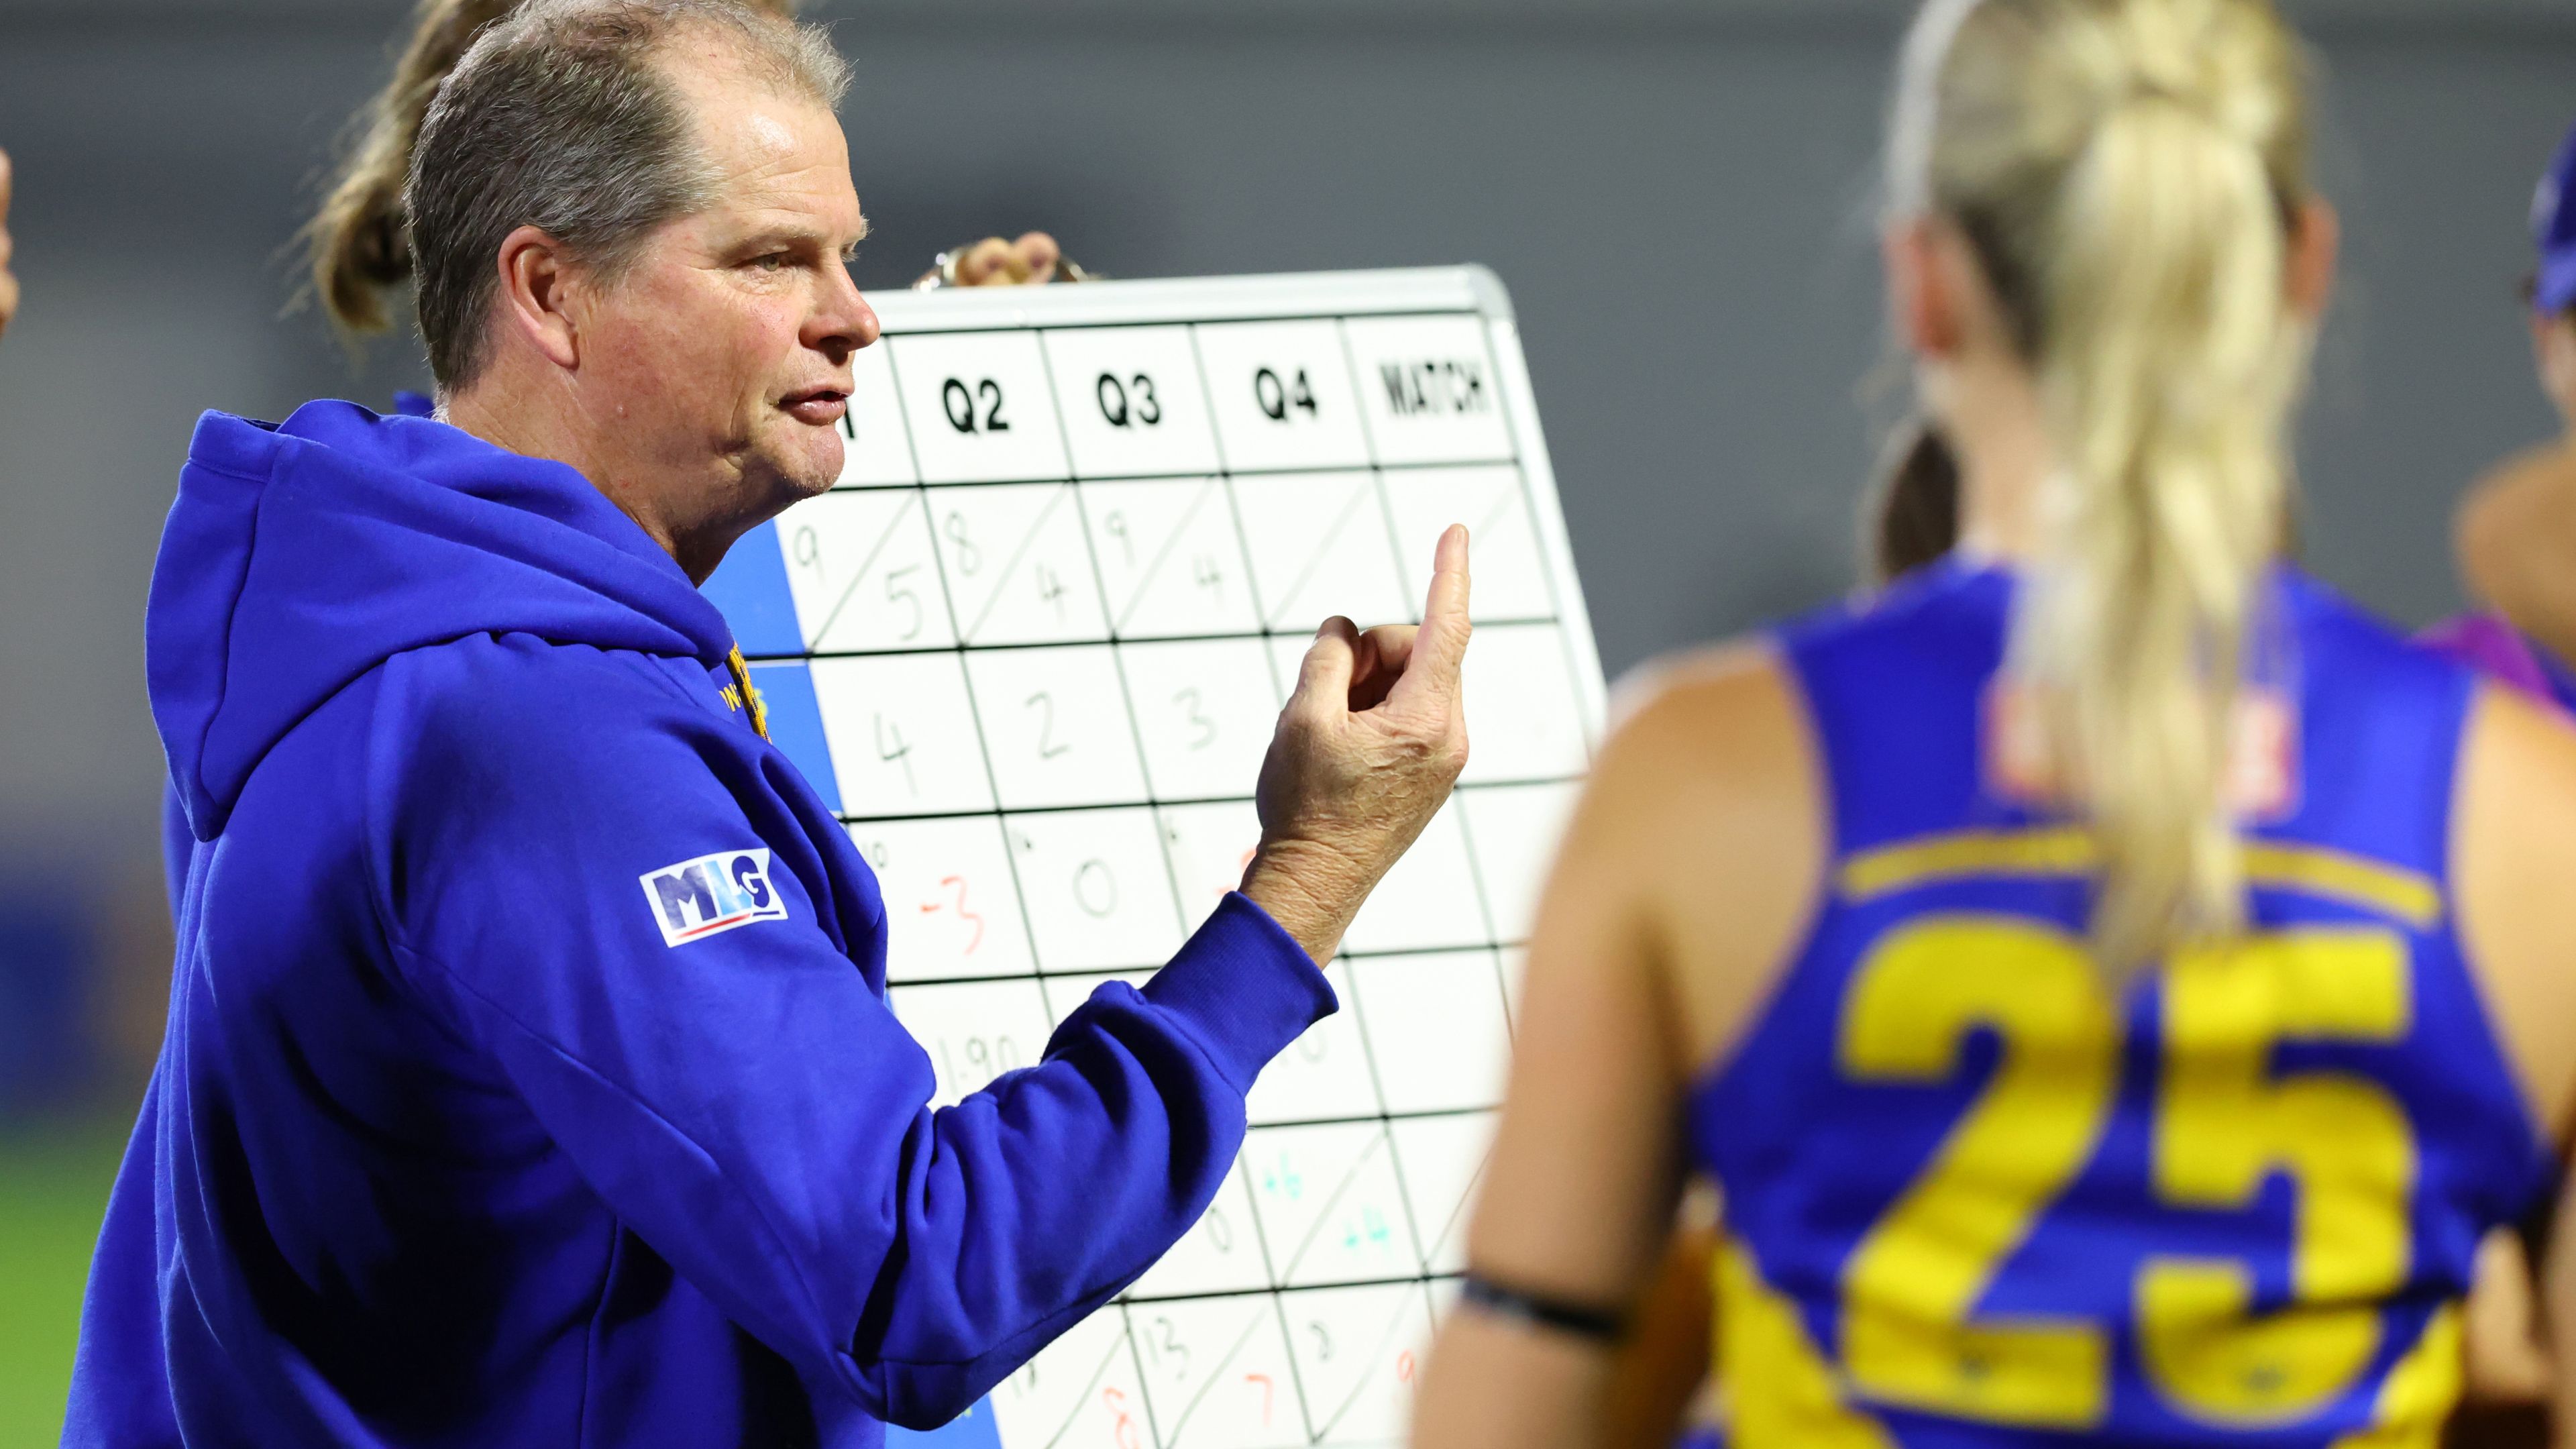 West Coast Eagles coach forced to apologise for 'unacceptable' AFLW fixture comments